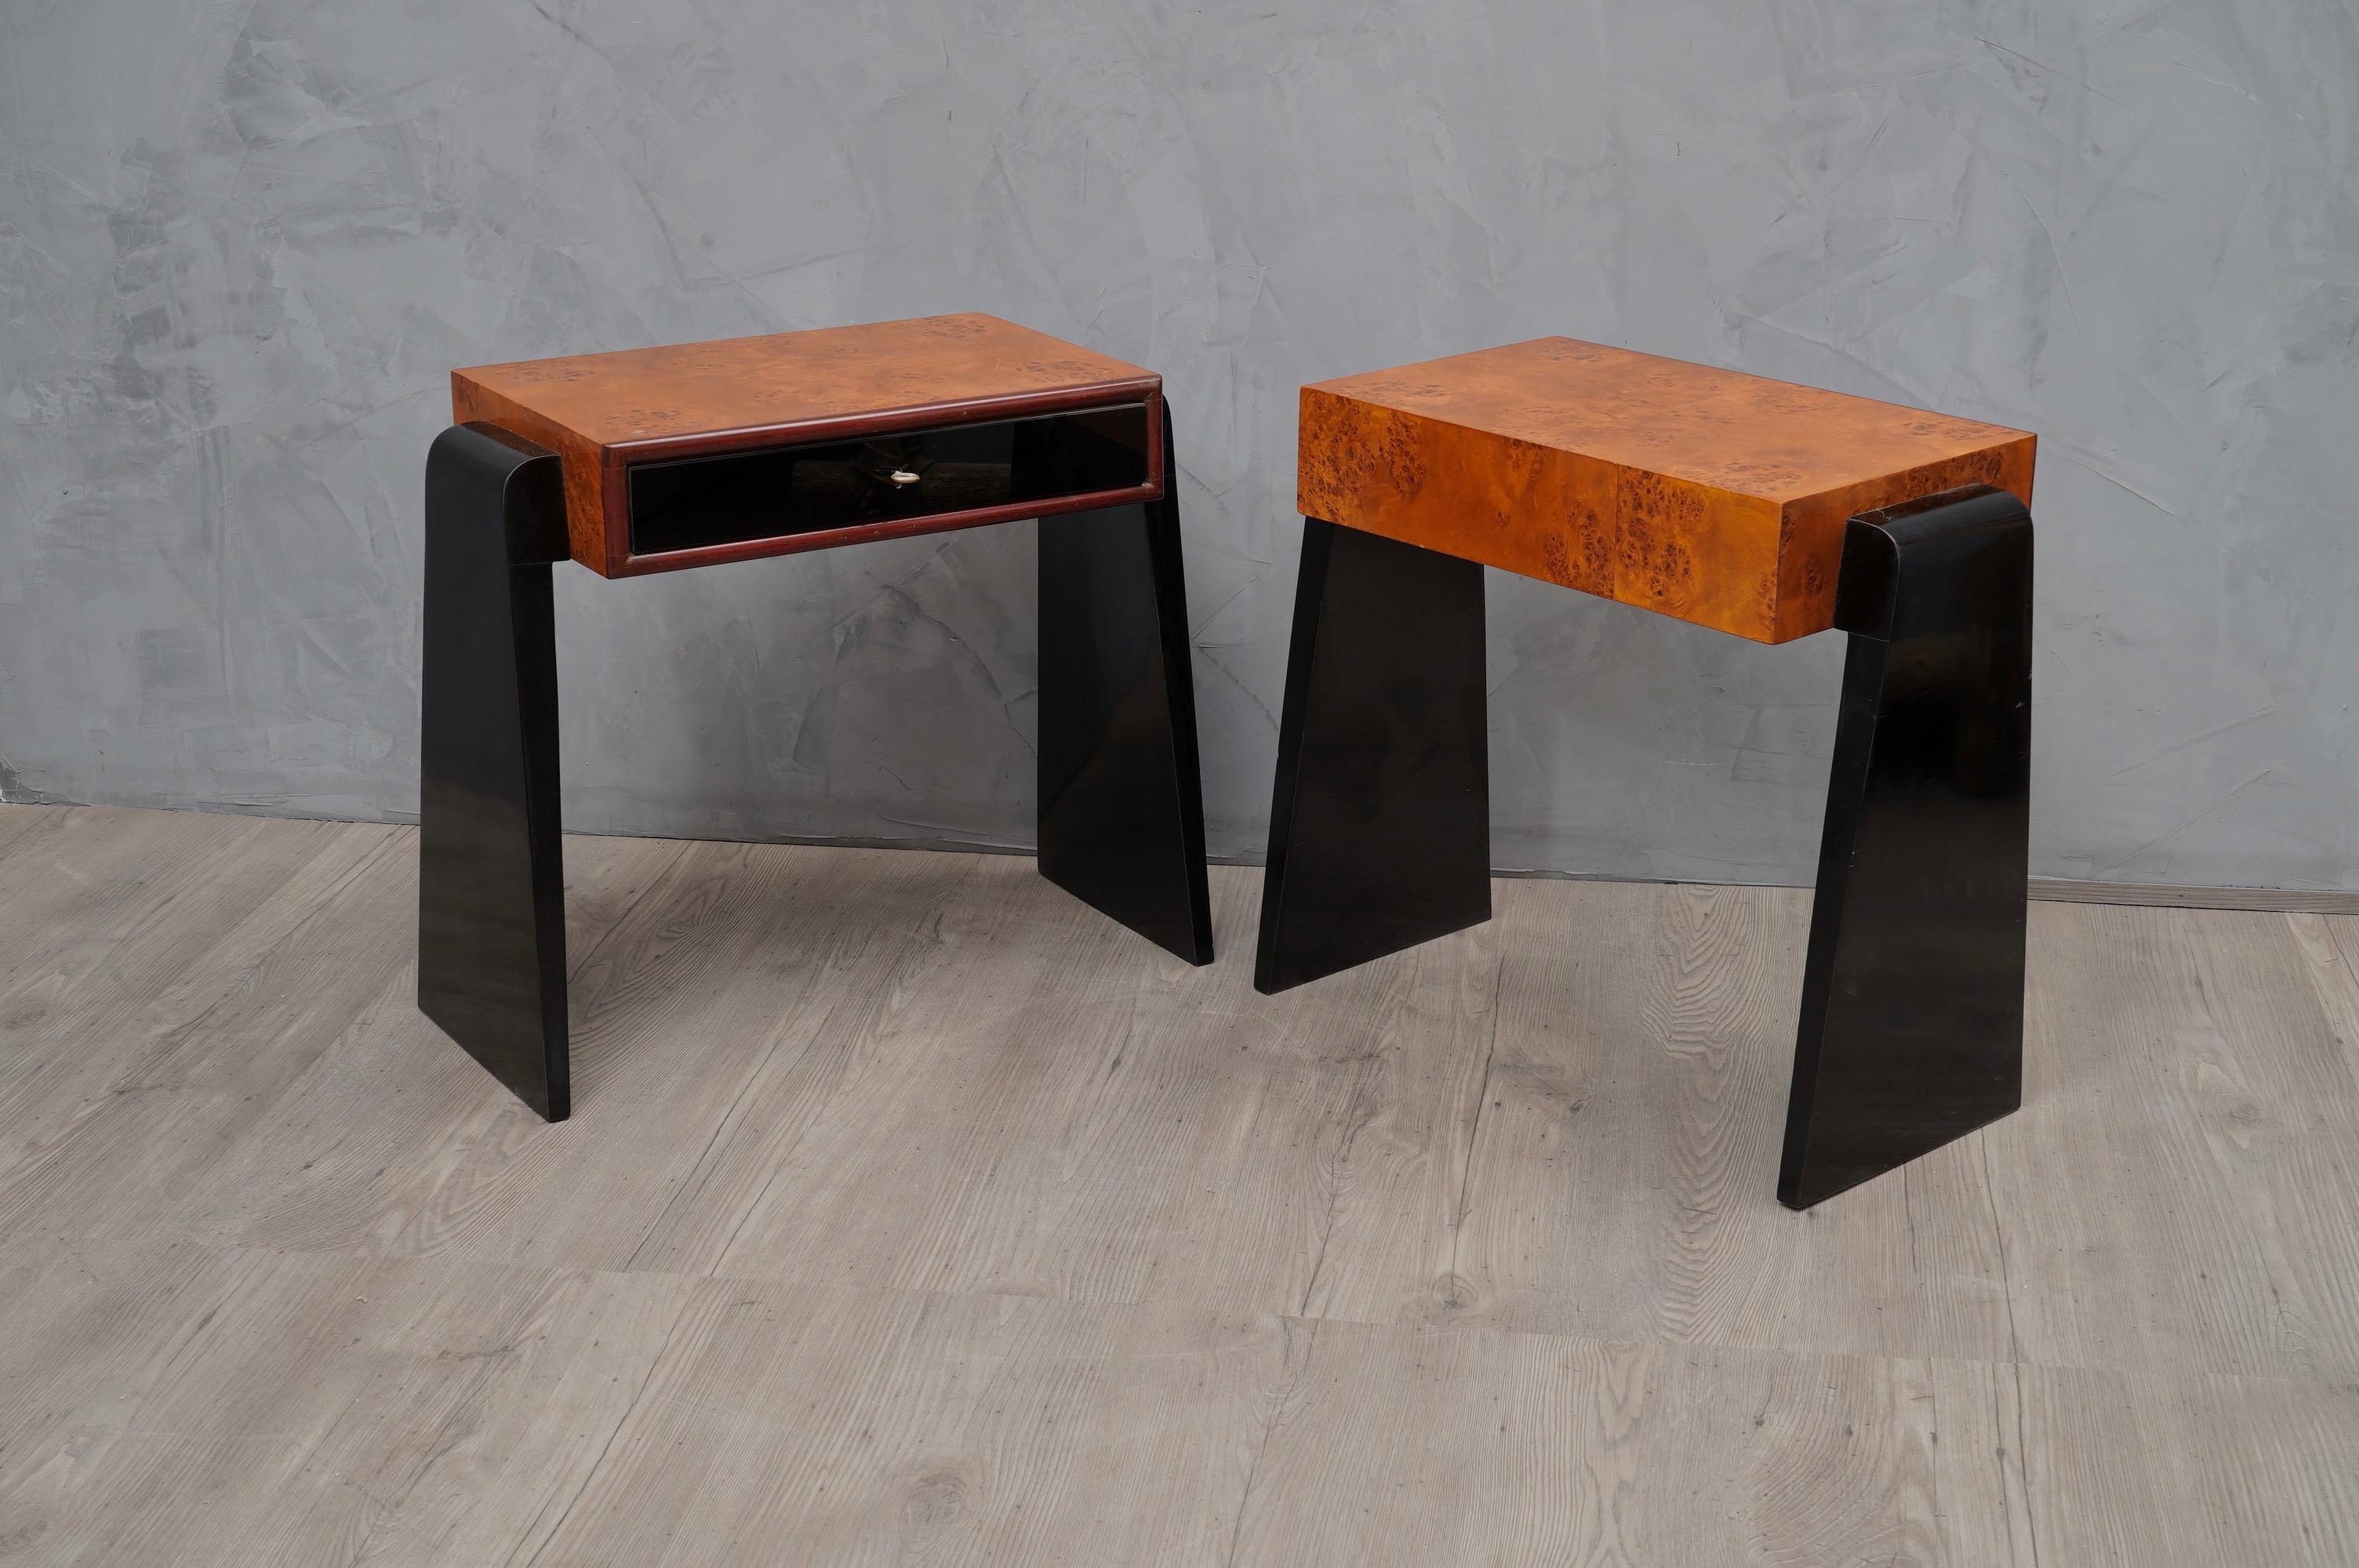 Pair of beautiful tables with a very particular design, a very luxurious appearance due the use of not common materials.

The body and top of the table is veneered in poplar briar wood, while a black glass opal has been applied to the drawer at